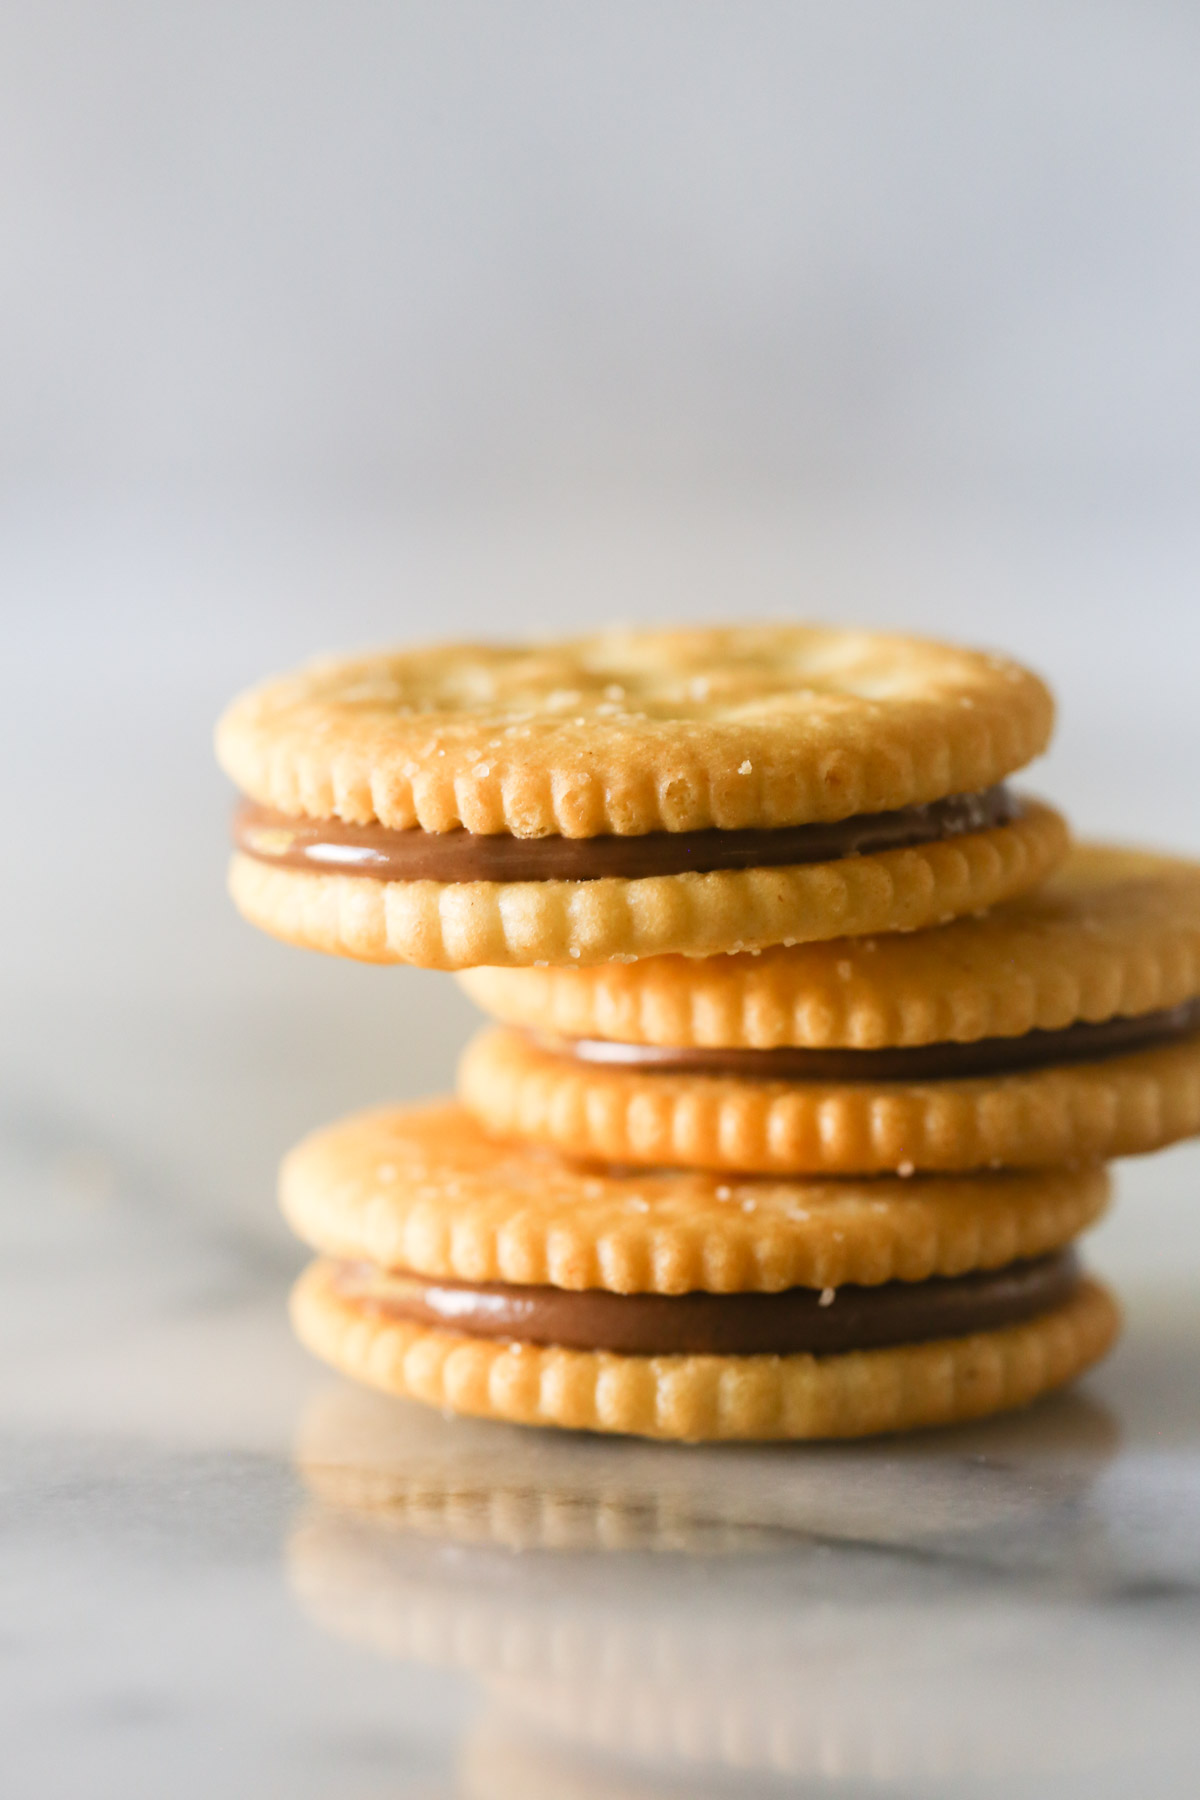 Three Ritz and Rolo sandwiches stacked on top of each other before they were dipped in chocolate.  